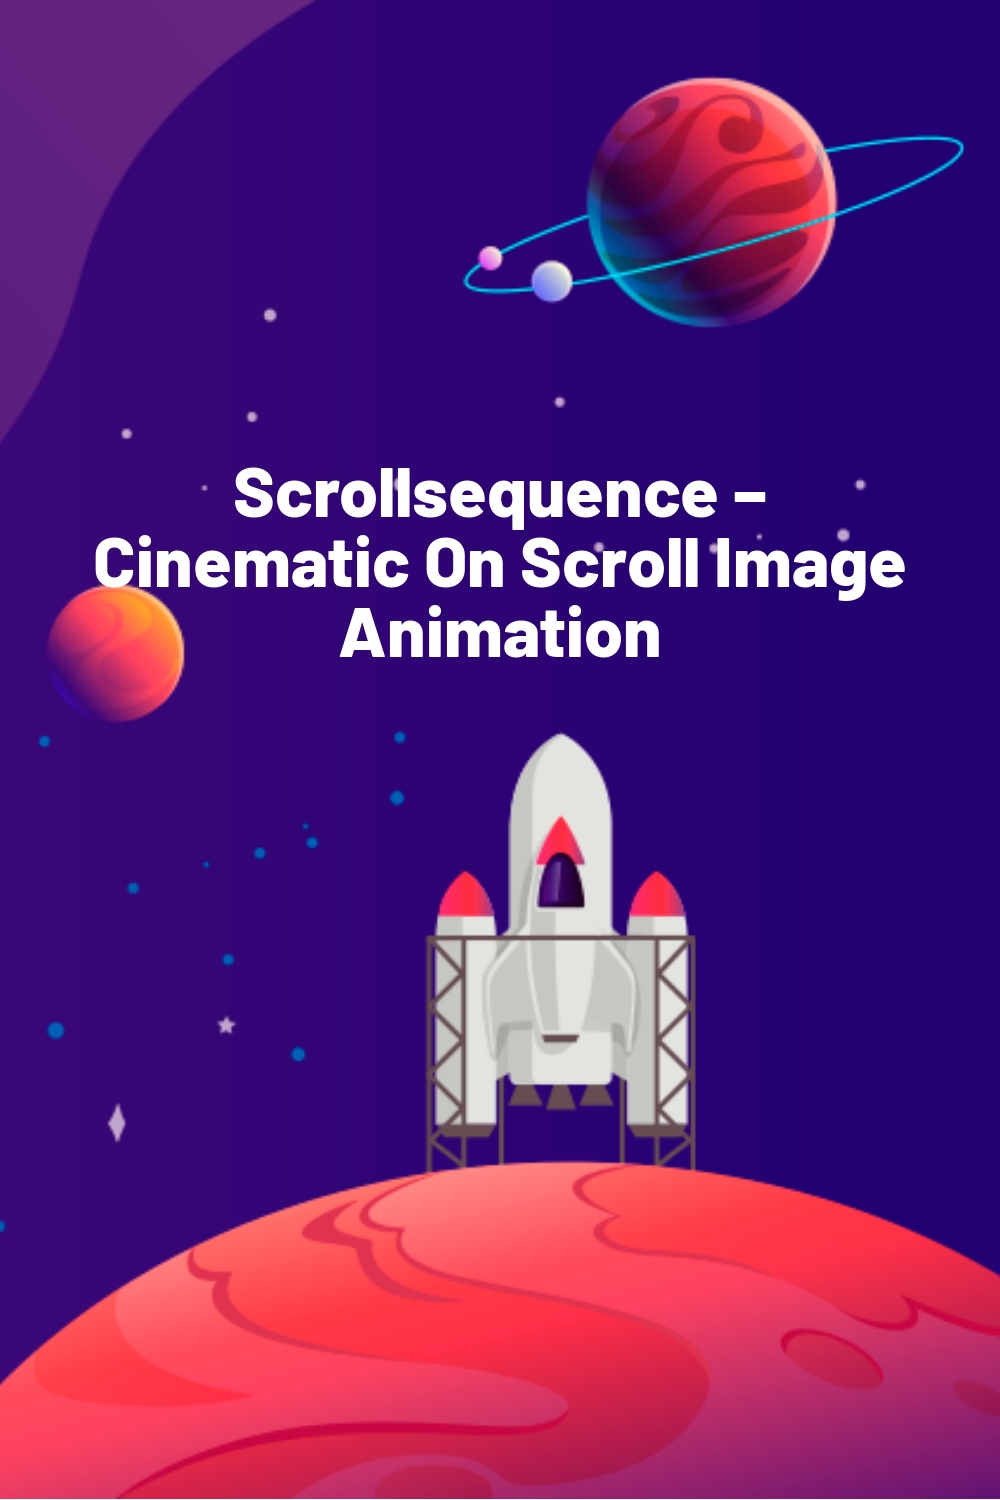 Scrollsequence – Cinematic On Scroll Image Animation